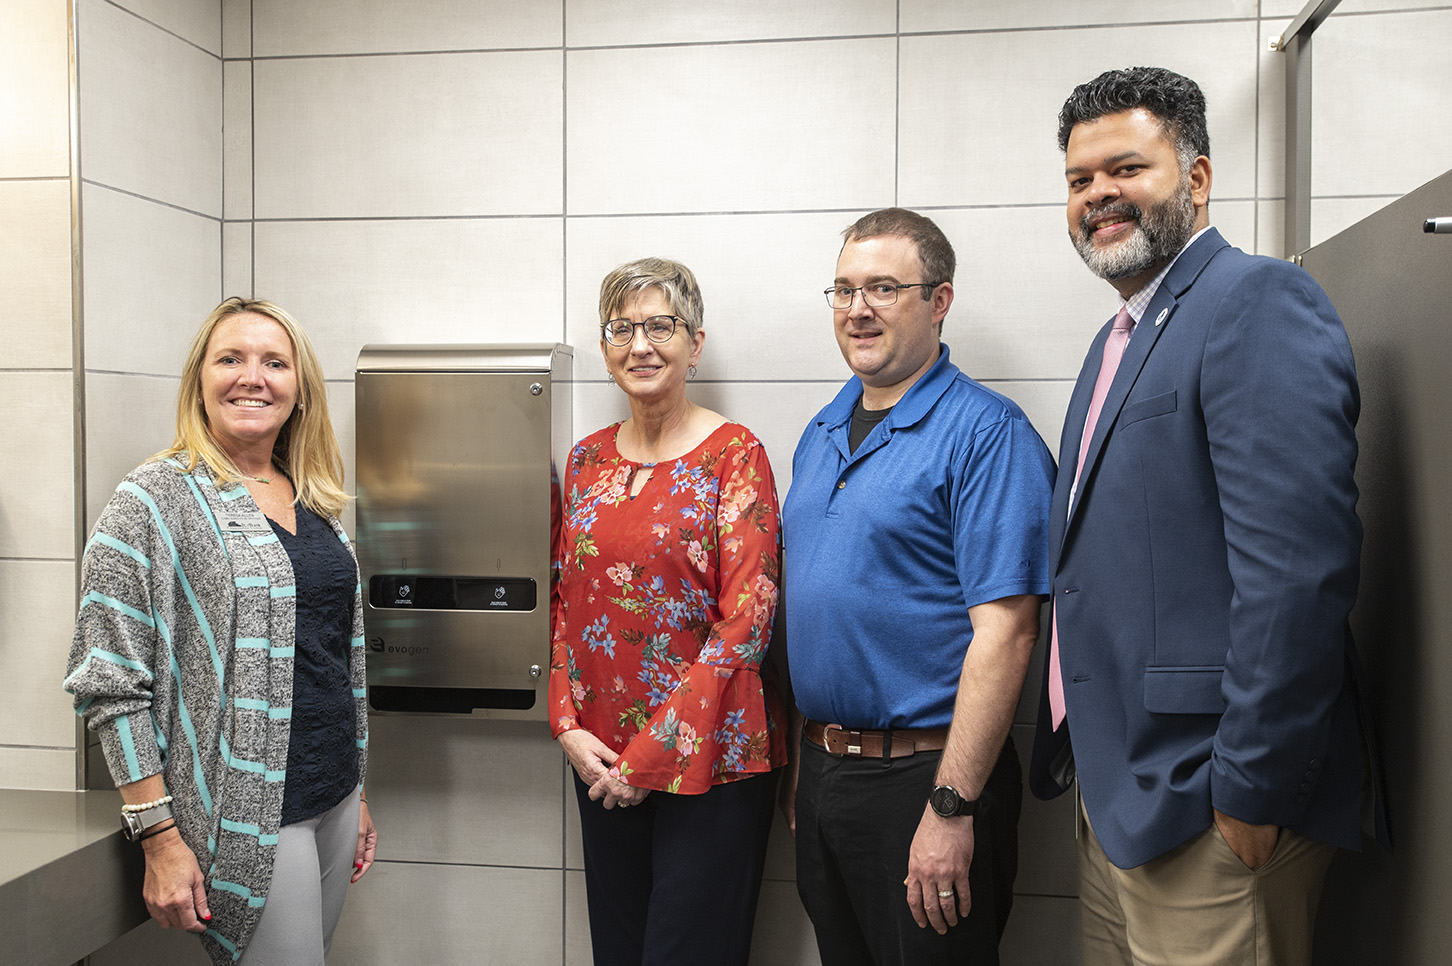 Pictured, from left to right, are Charitable Union CEO Teresa Allen, KCC Foundation Executive Director Teresa Durham, KCC Director of Institutional Facilities Brad Fuller and Interim KCC President Dr. Paul Watson II.